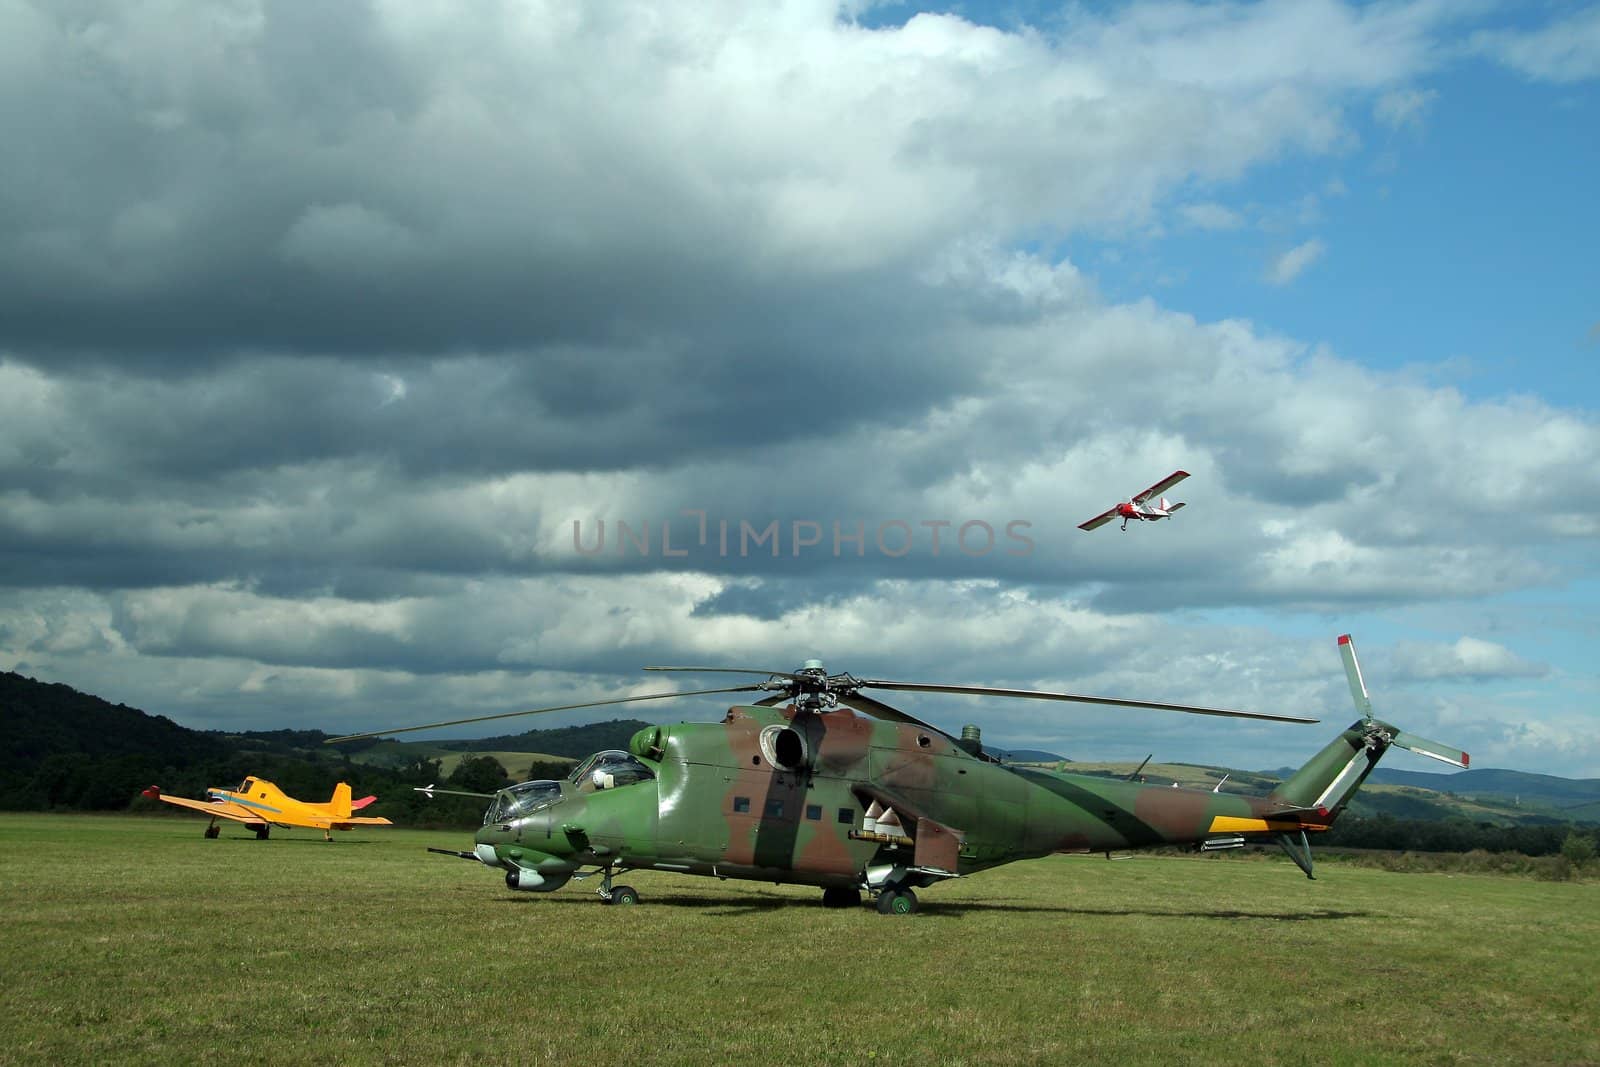 army helicopter and yellow plane on green airfield, white airplane in air, heavy clouds 